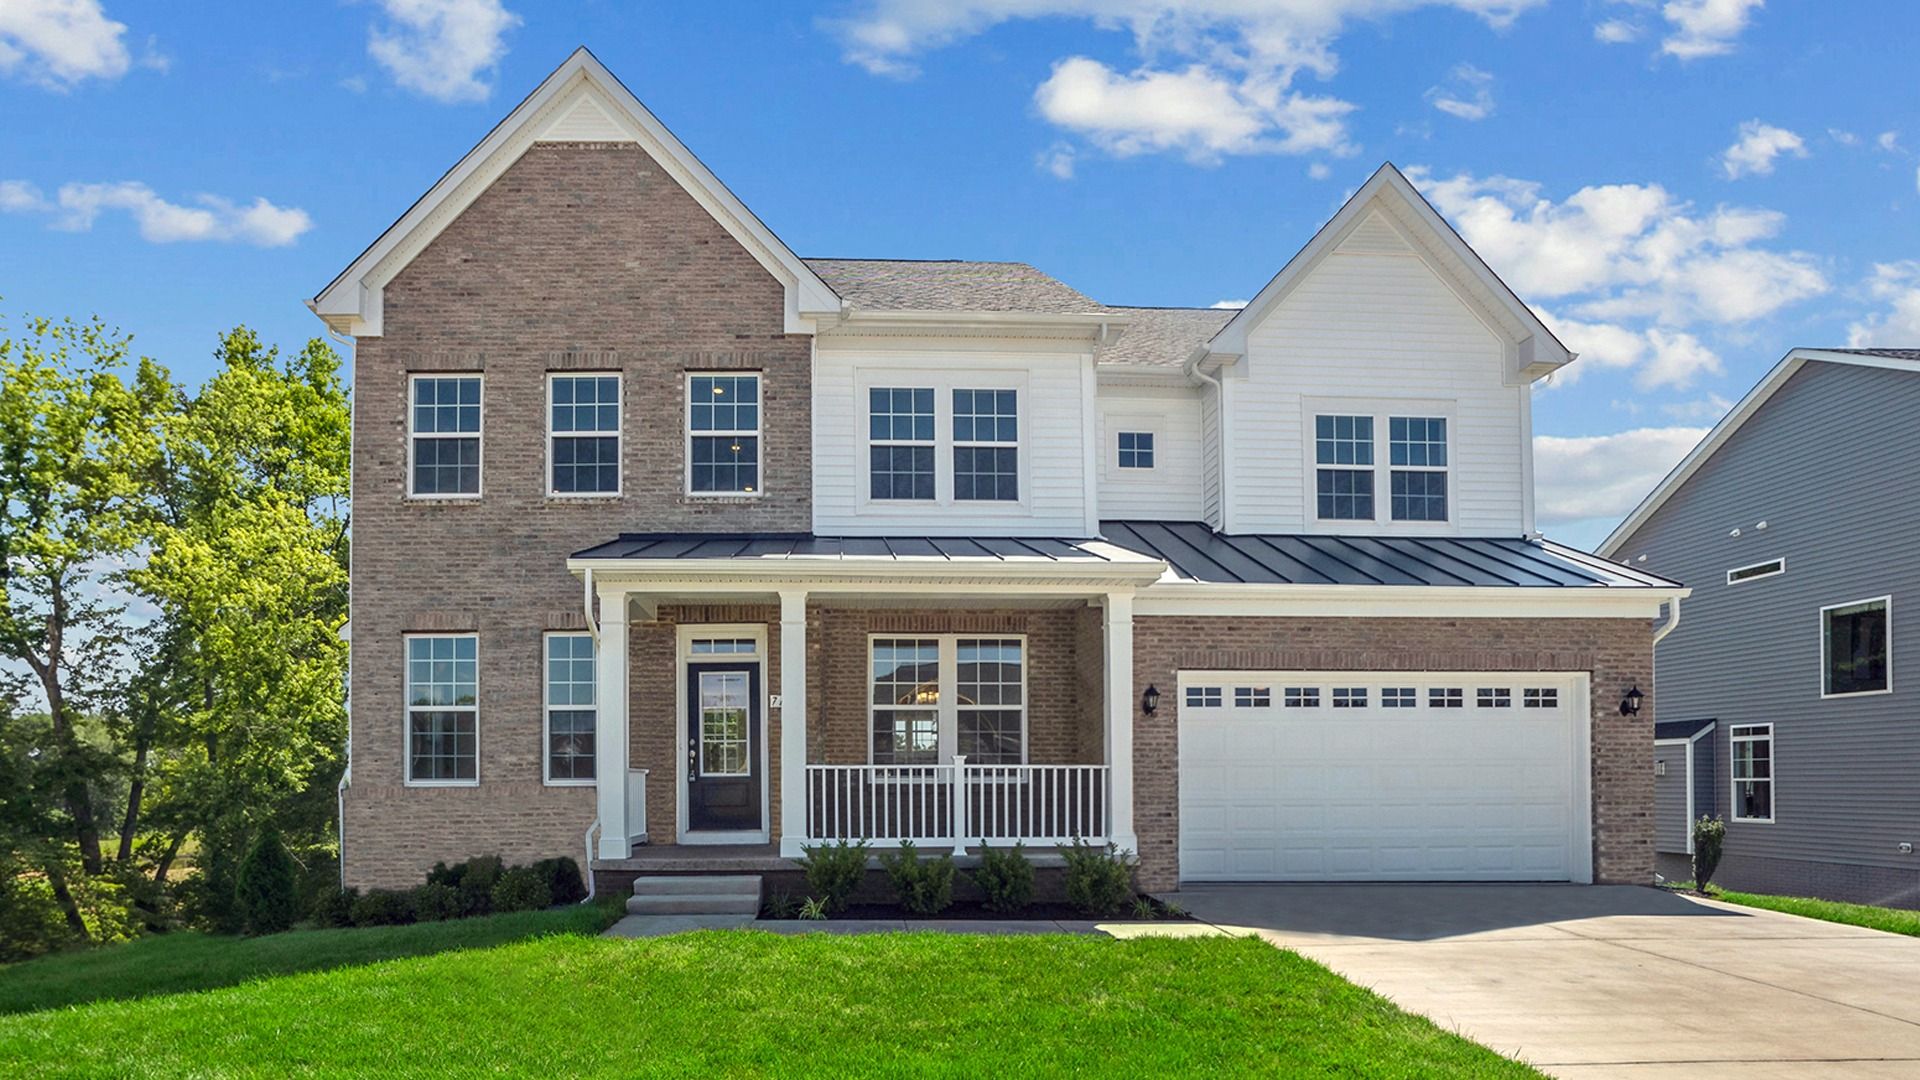 Emory Exterior:The Emory Design with Brick and Siding at Fairway Estates